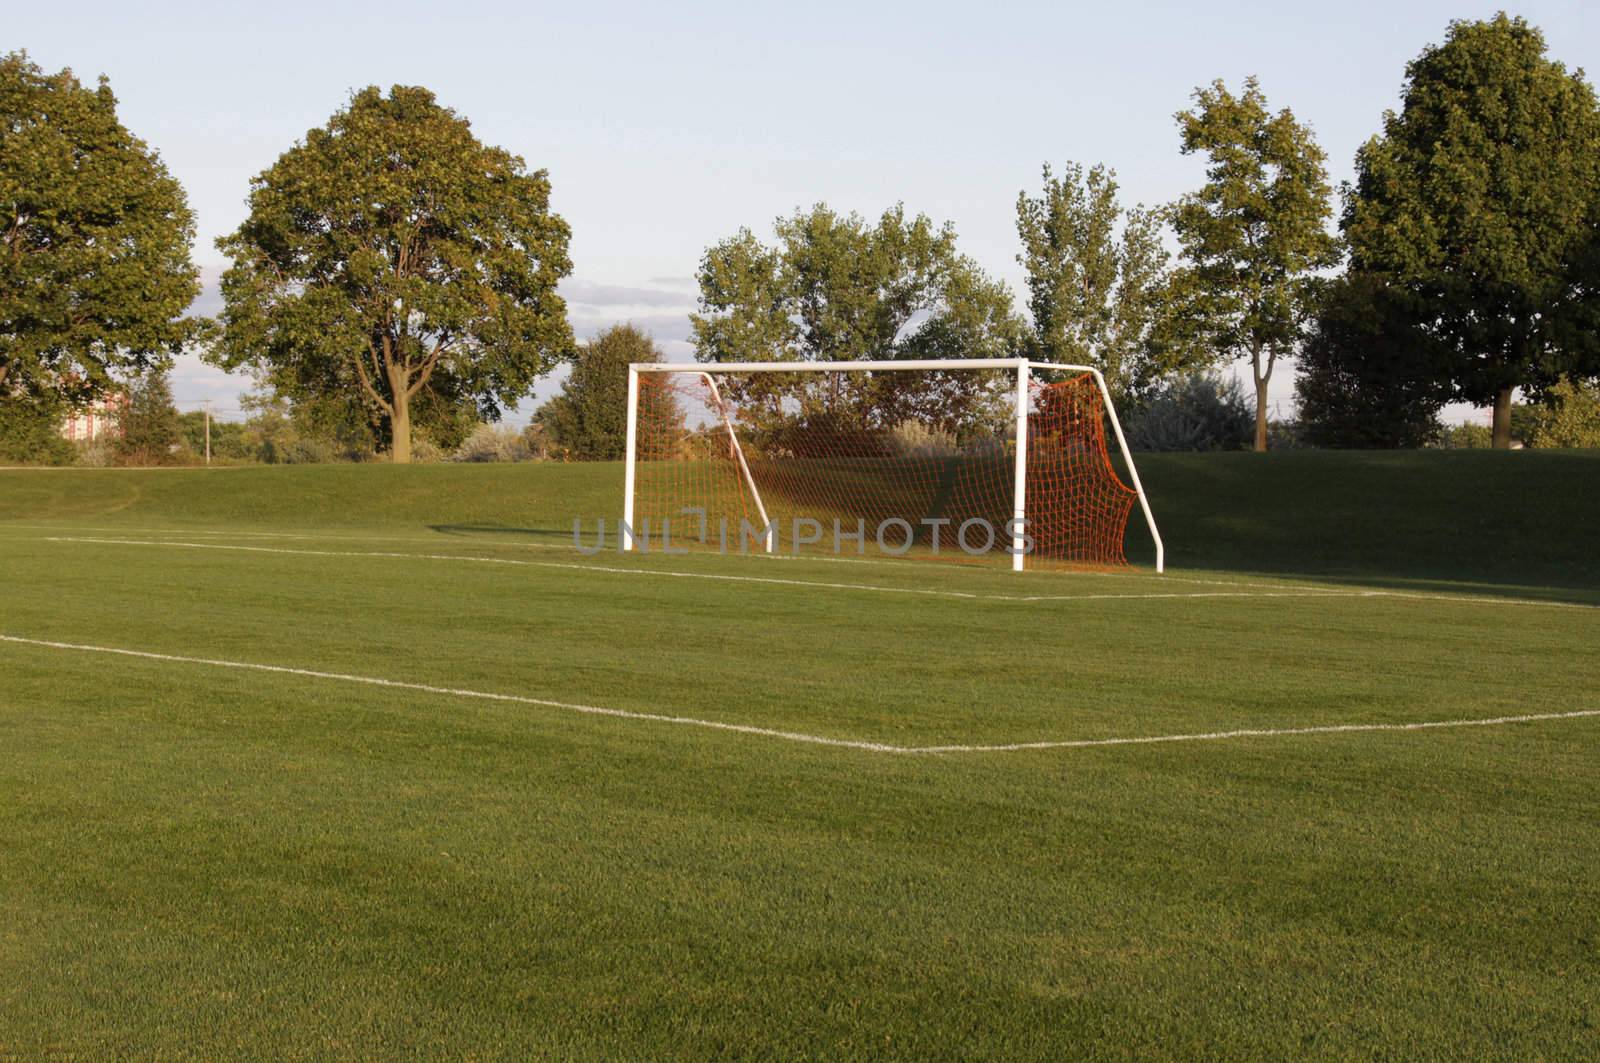 A soccer net with shot in bright sunlight with trees in the background.
